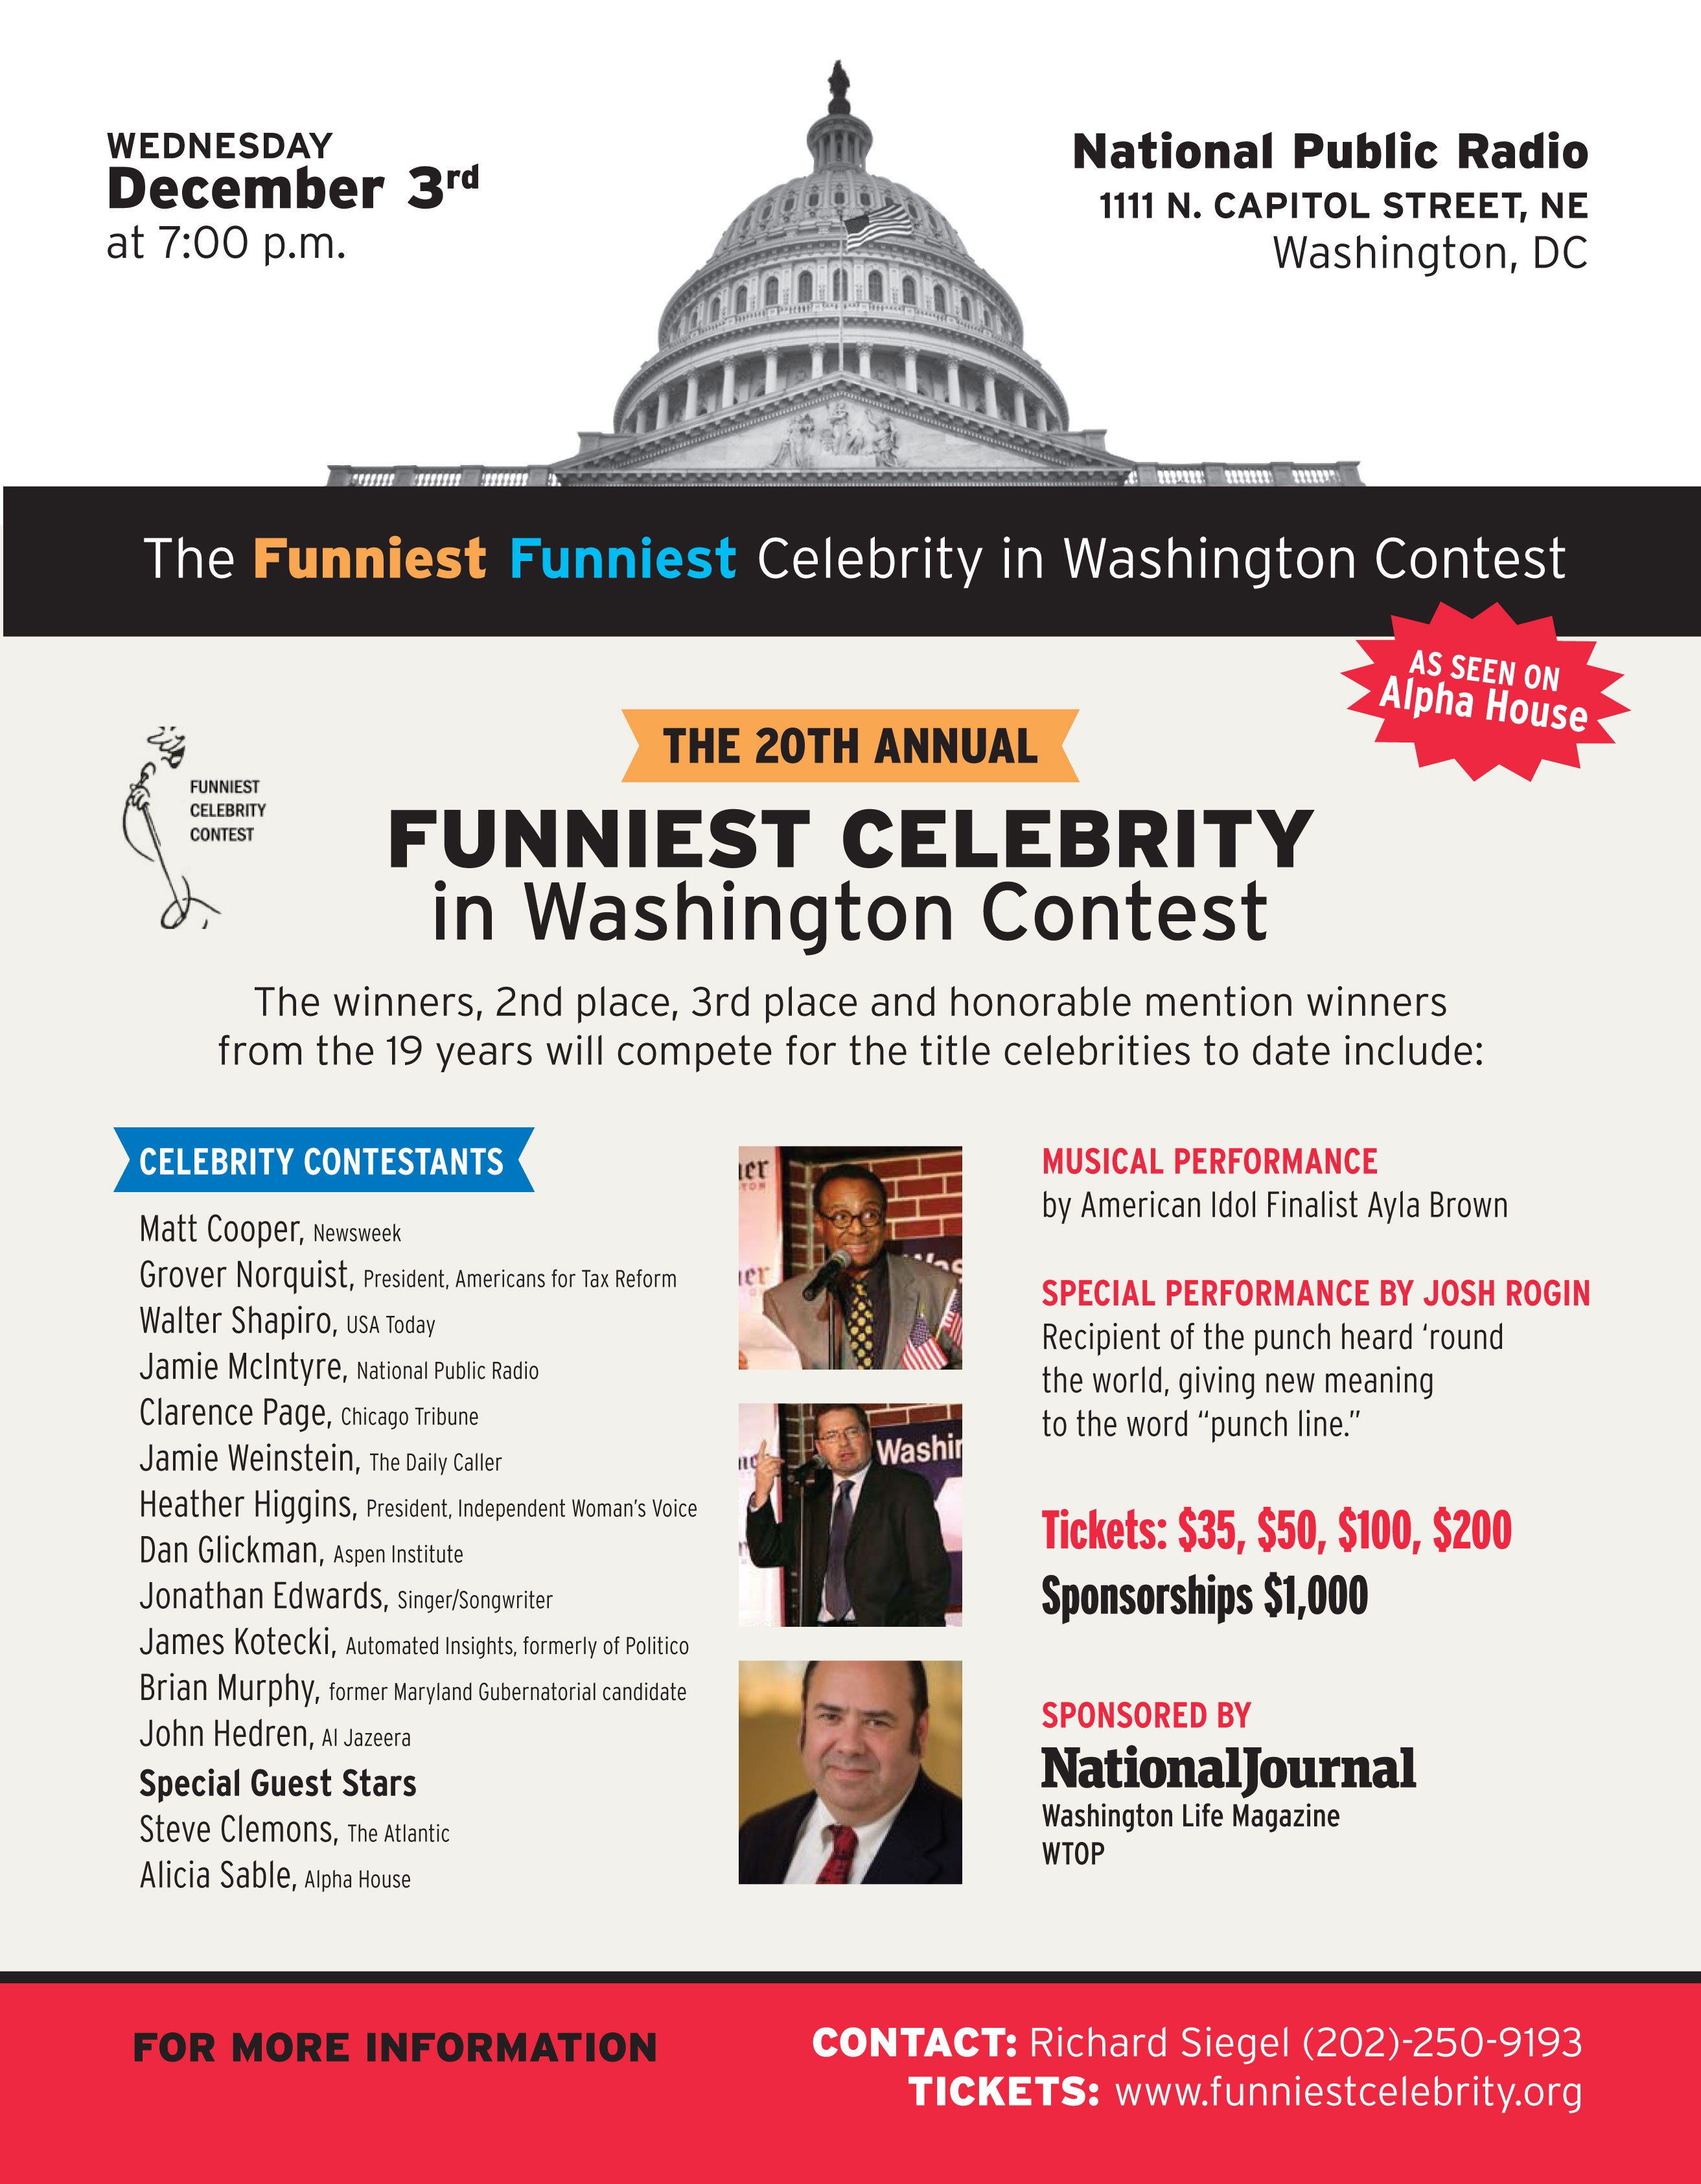 Who is the funniest celebrity in D.C.?